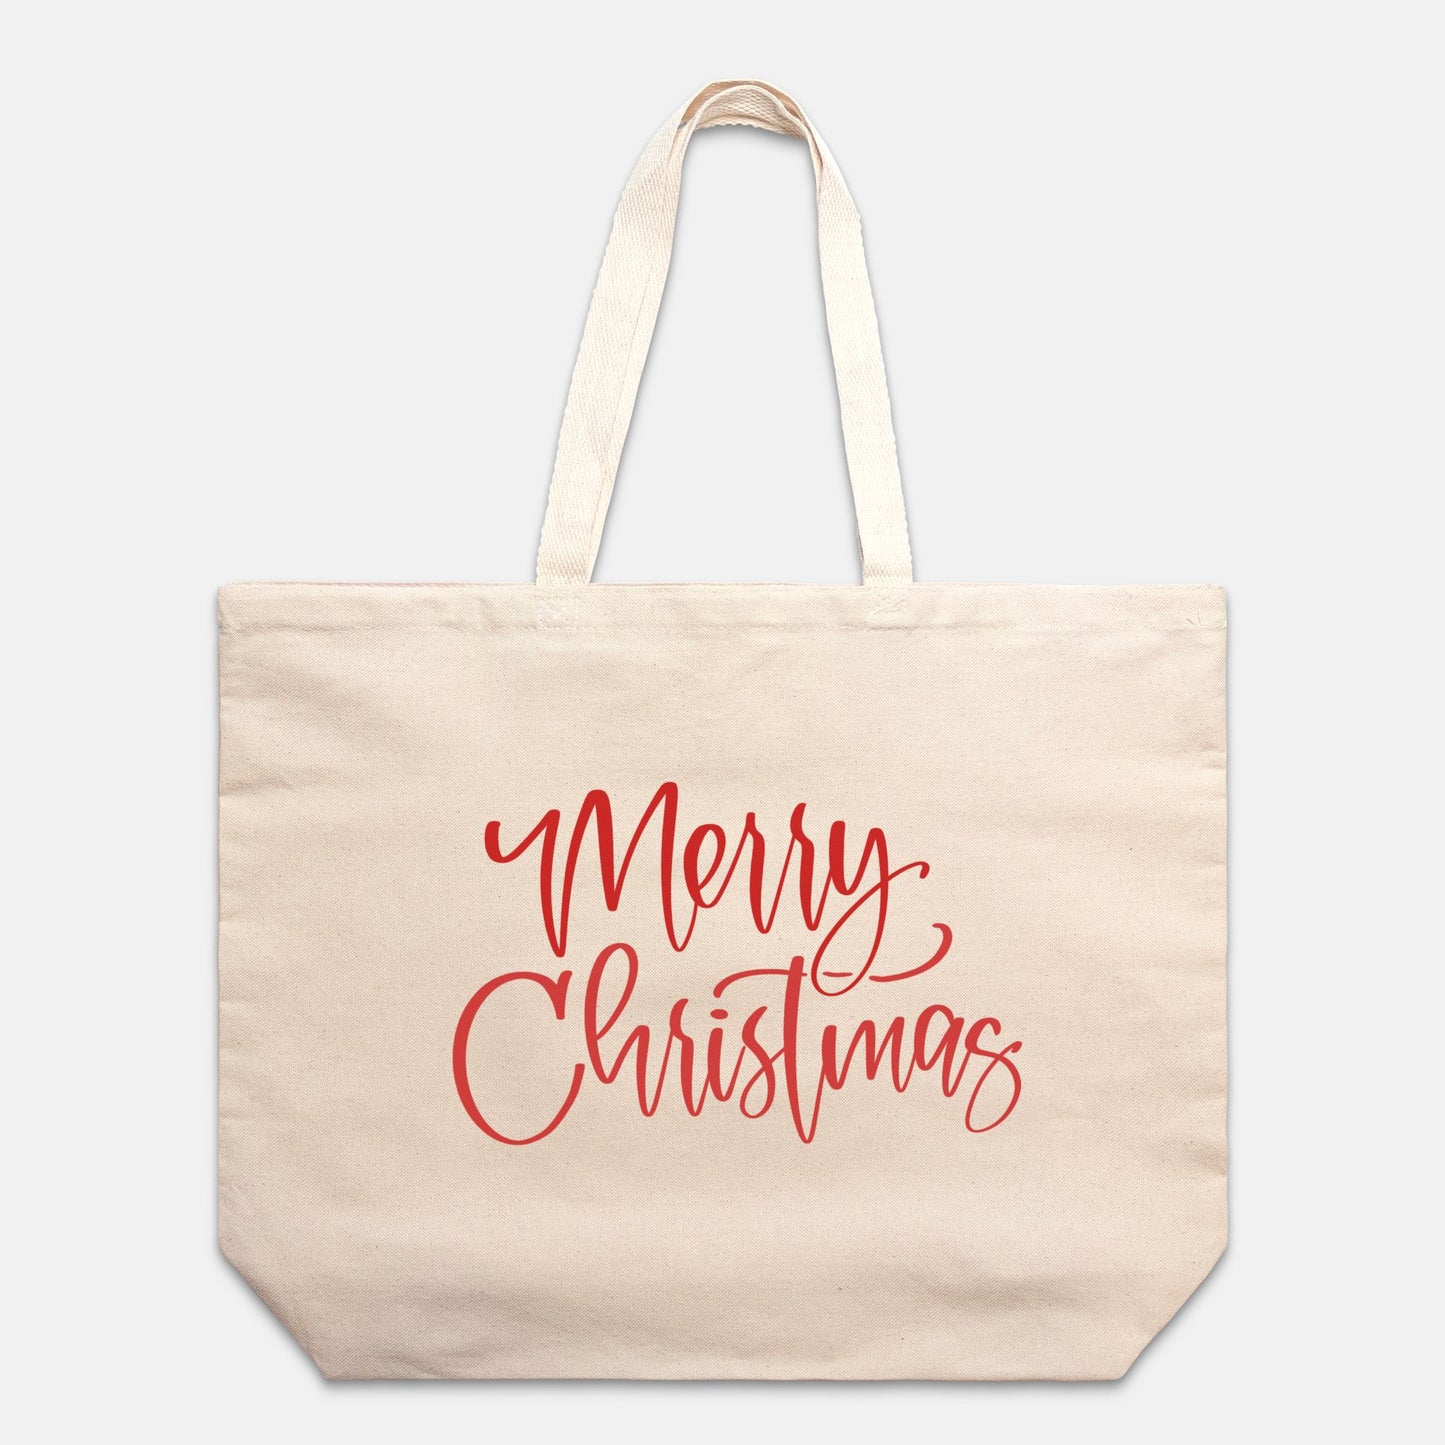 Merry Christmas Cotton Canvas Oversized Tote